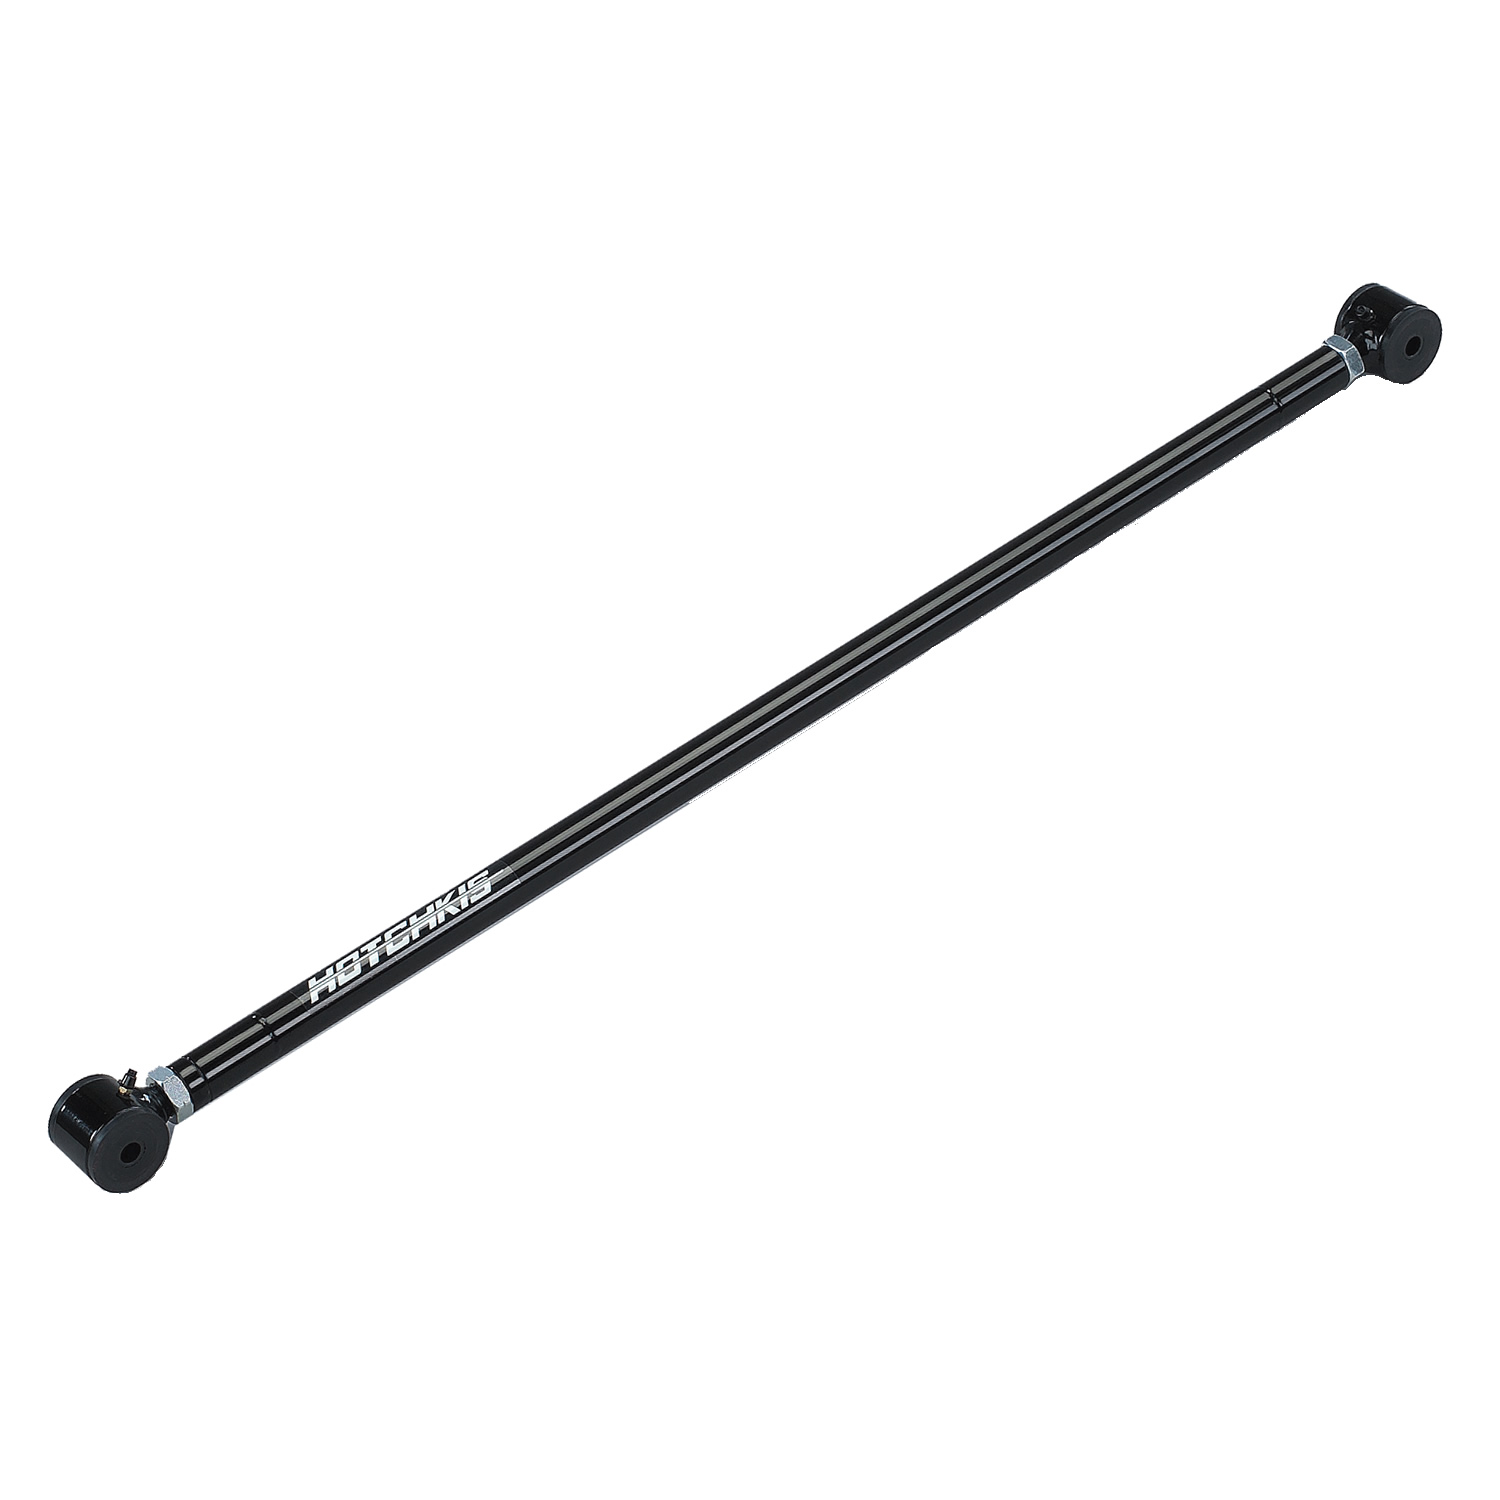 2005-2014 Mustang Dbl Adjustable Panhard Rod from Hotchkis Sport Suspension